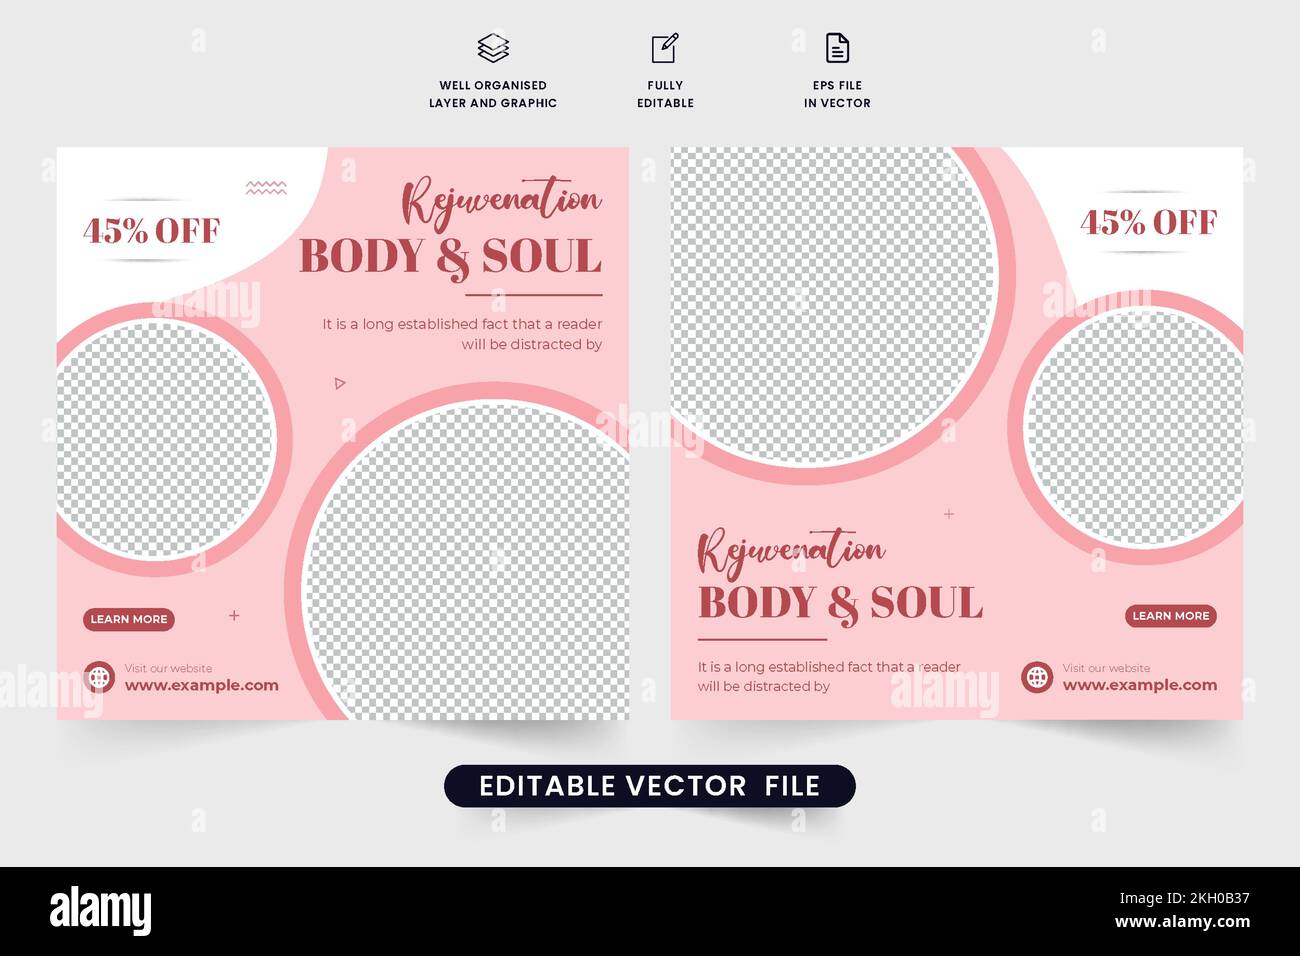 Spa center promotional web banner design with red and baby pink colors. Body treatment and wellness poster vector for marketing. Beauty salon social m Stock Vector